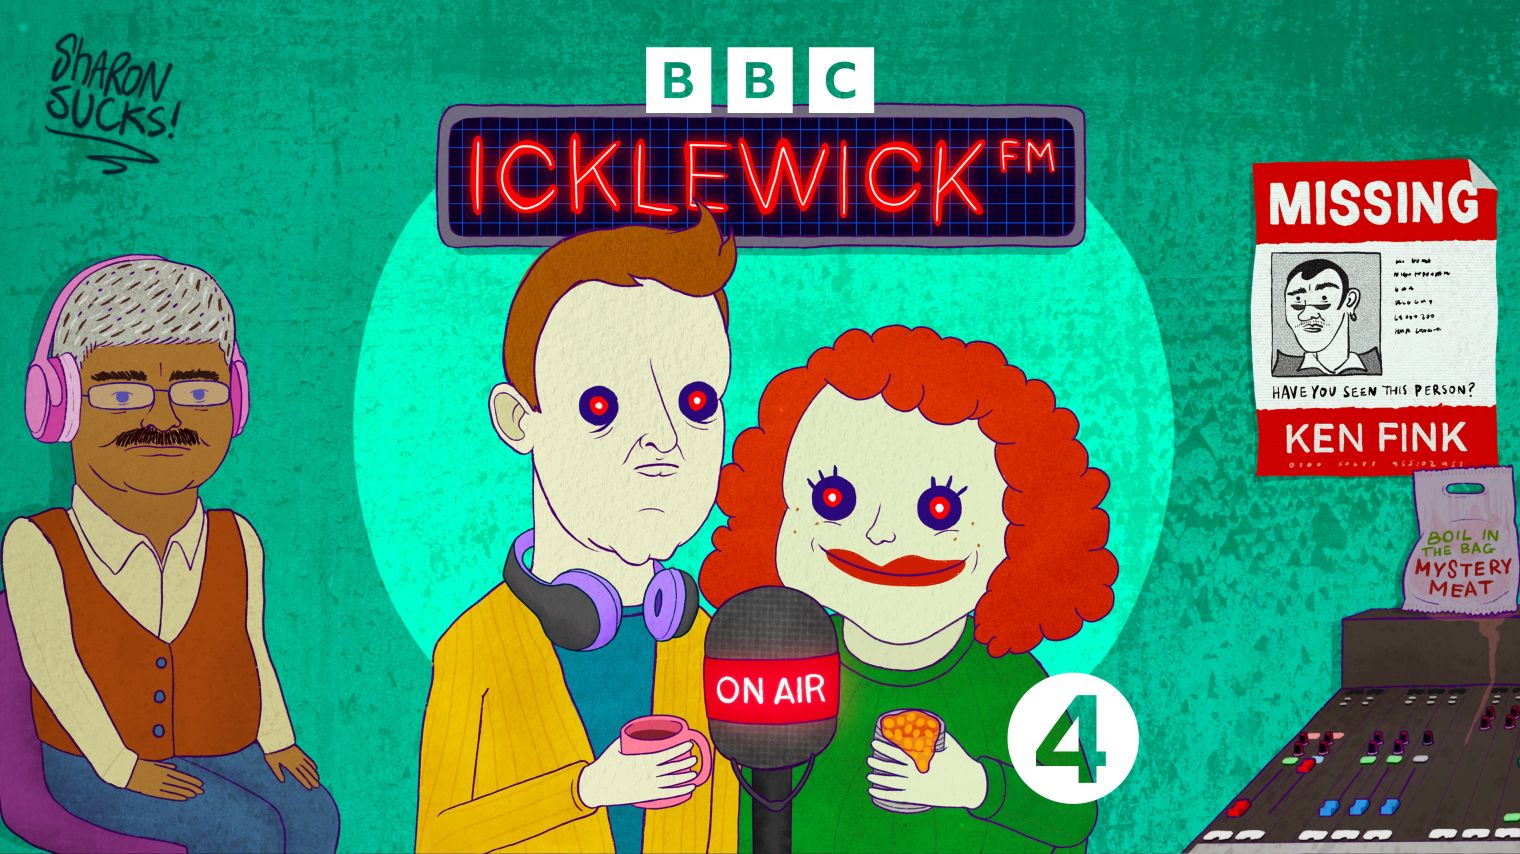 Amy Gledhill and Chris Cantrill's new Radio 4 comedy series ‘Icklewick FM' kicks off next Tuesday 23rd January at 11pm